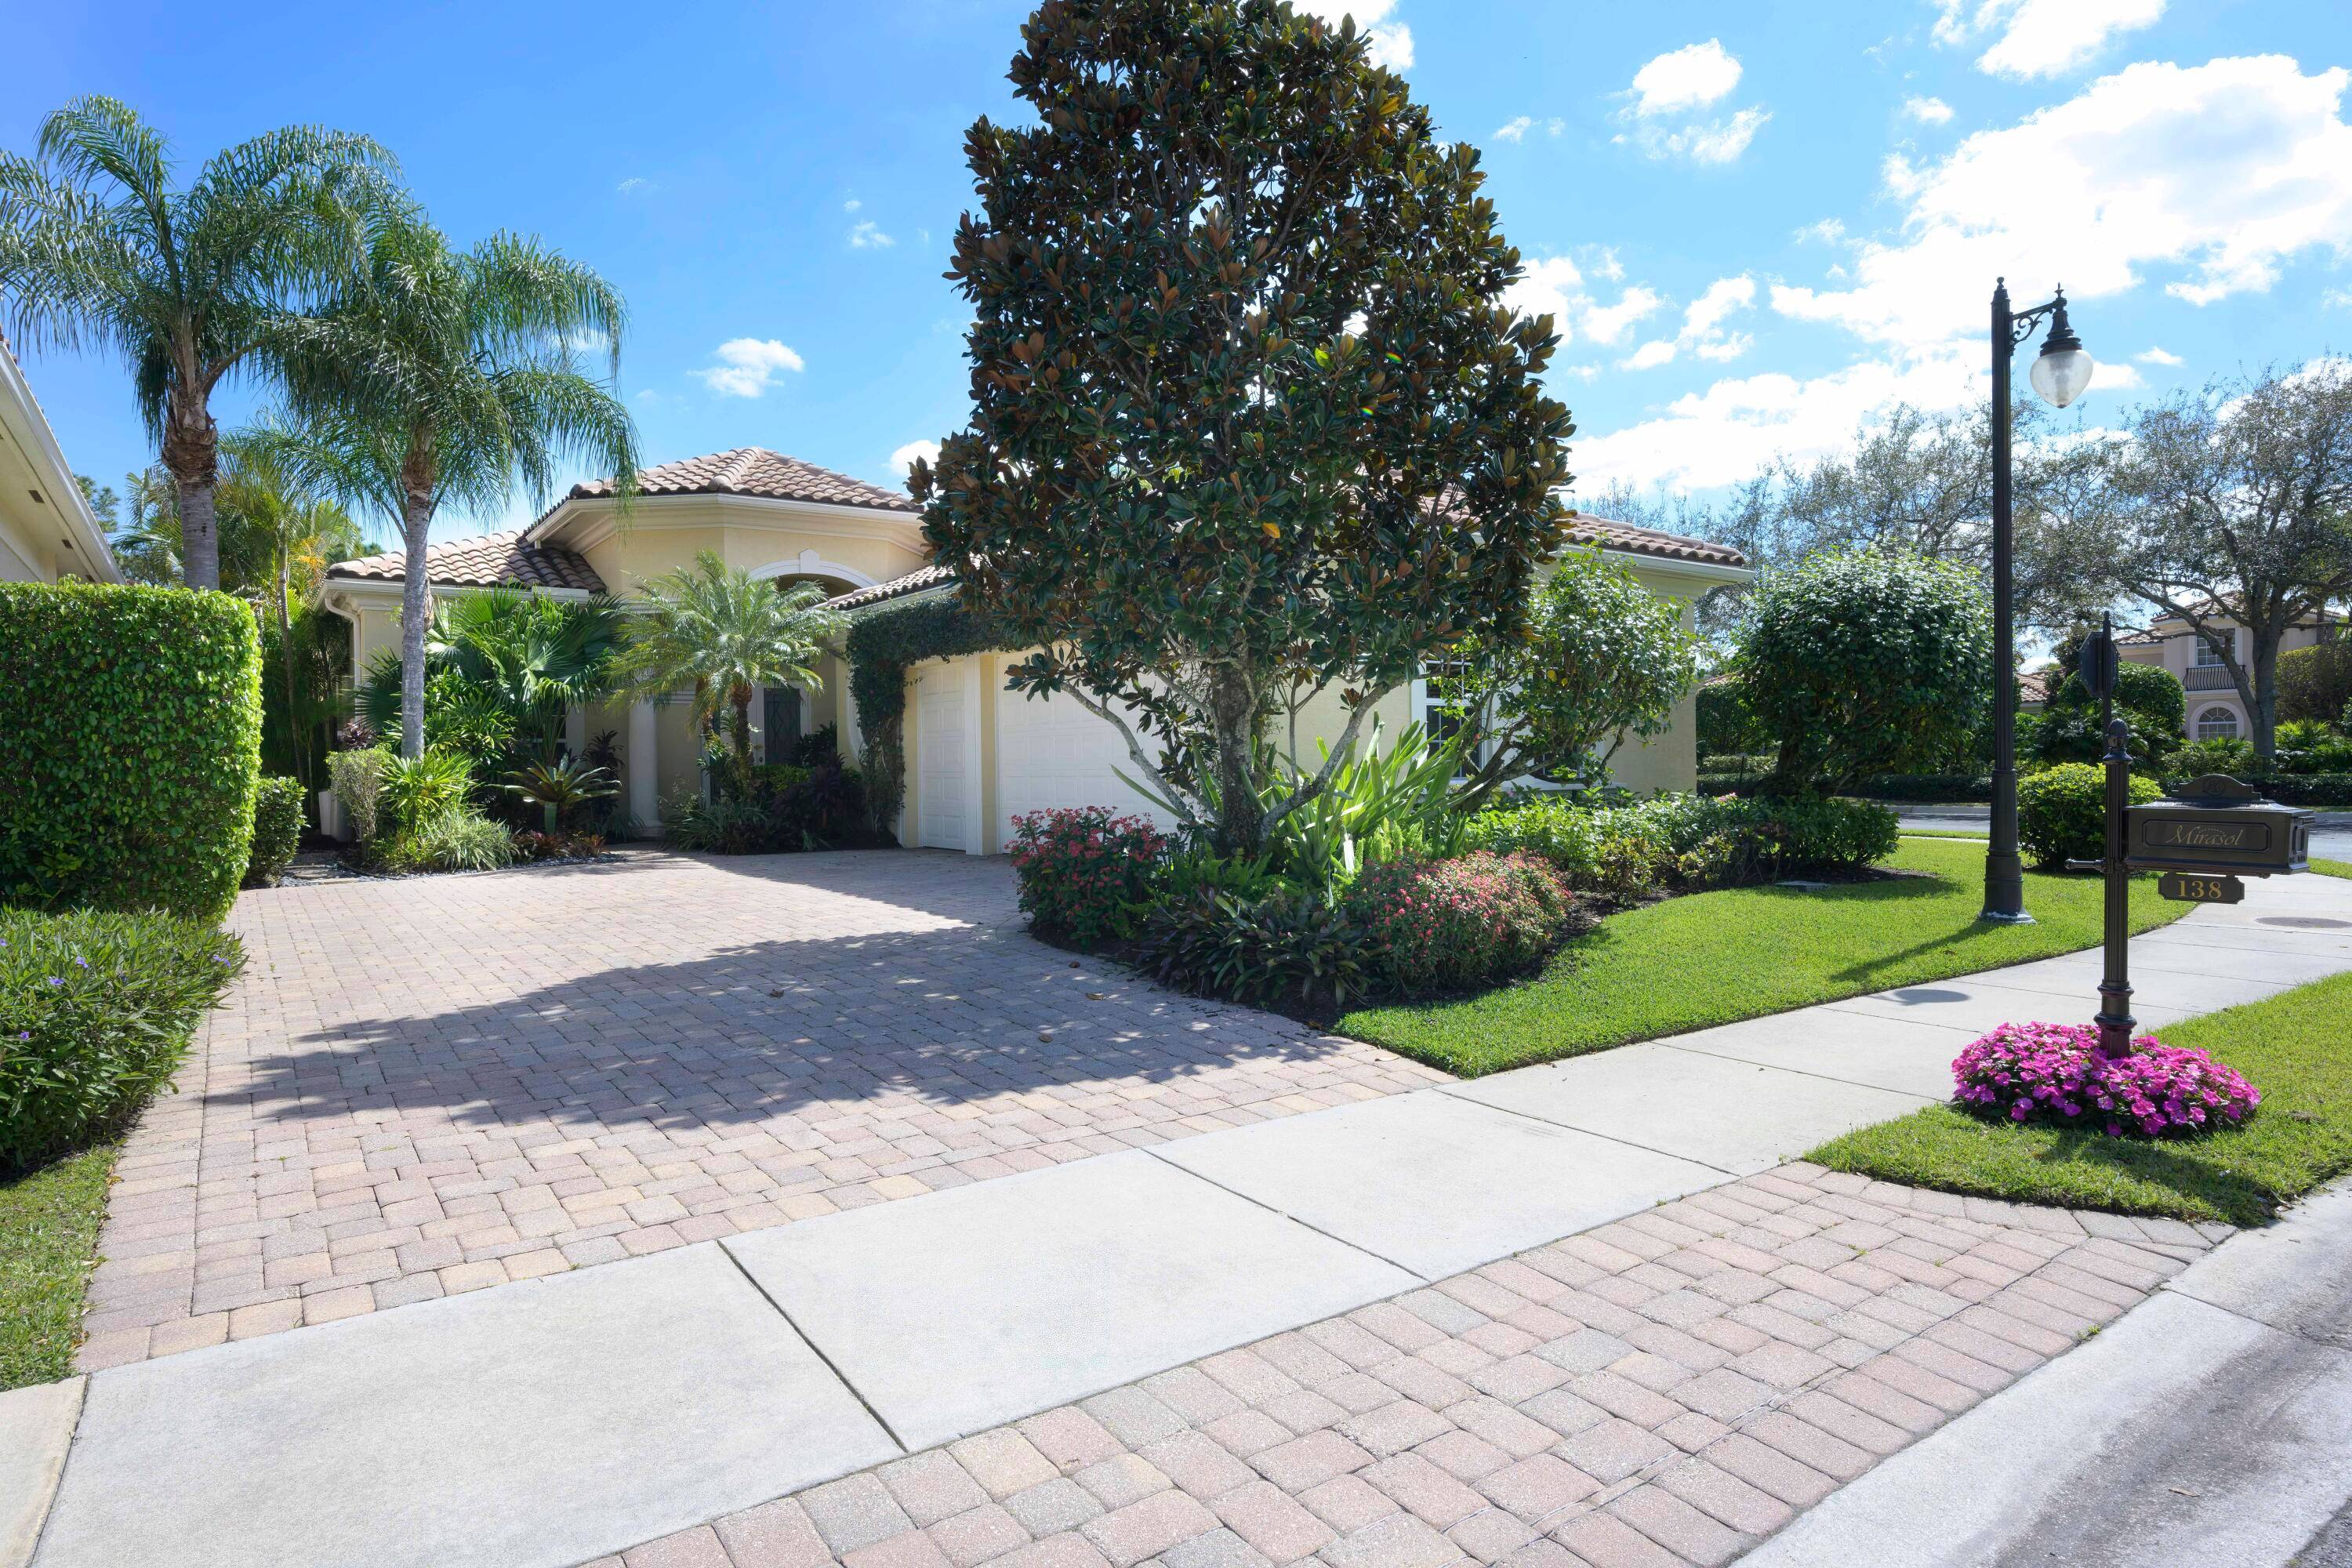 Beautifully designed and updated 3 bedroom 3 bath home in the Country Club of Mirasol.